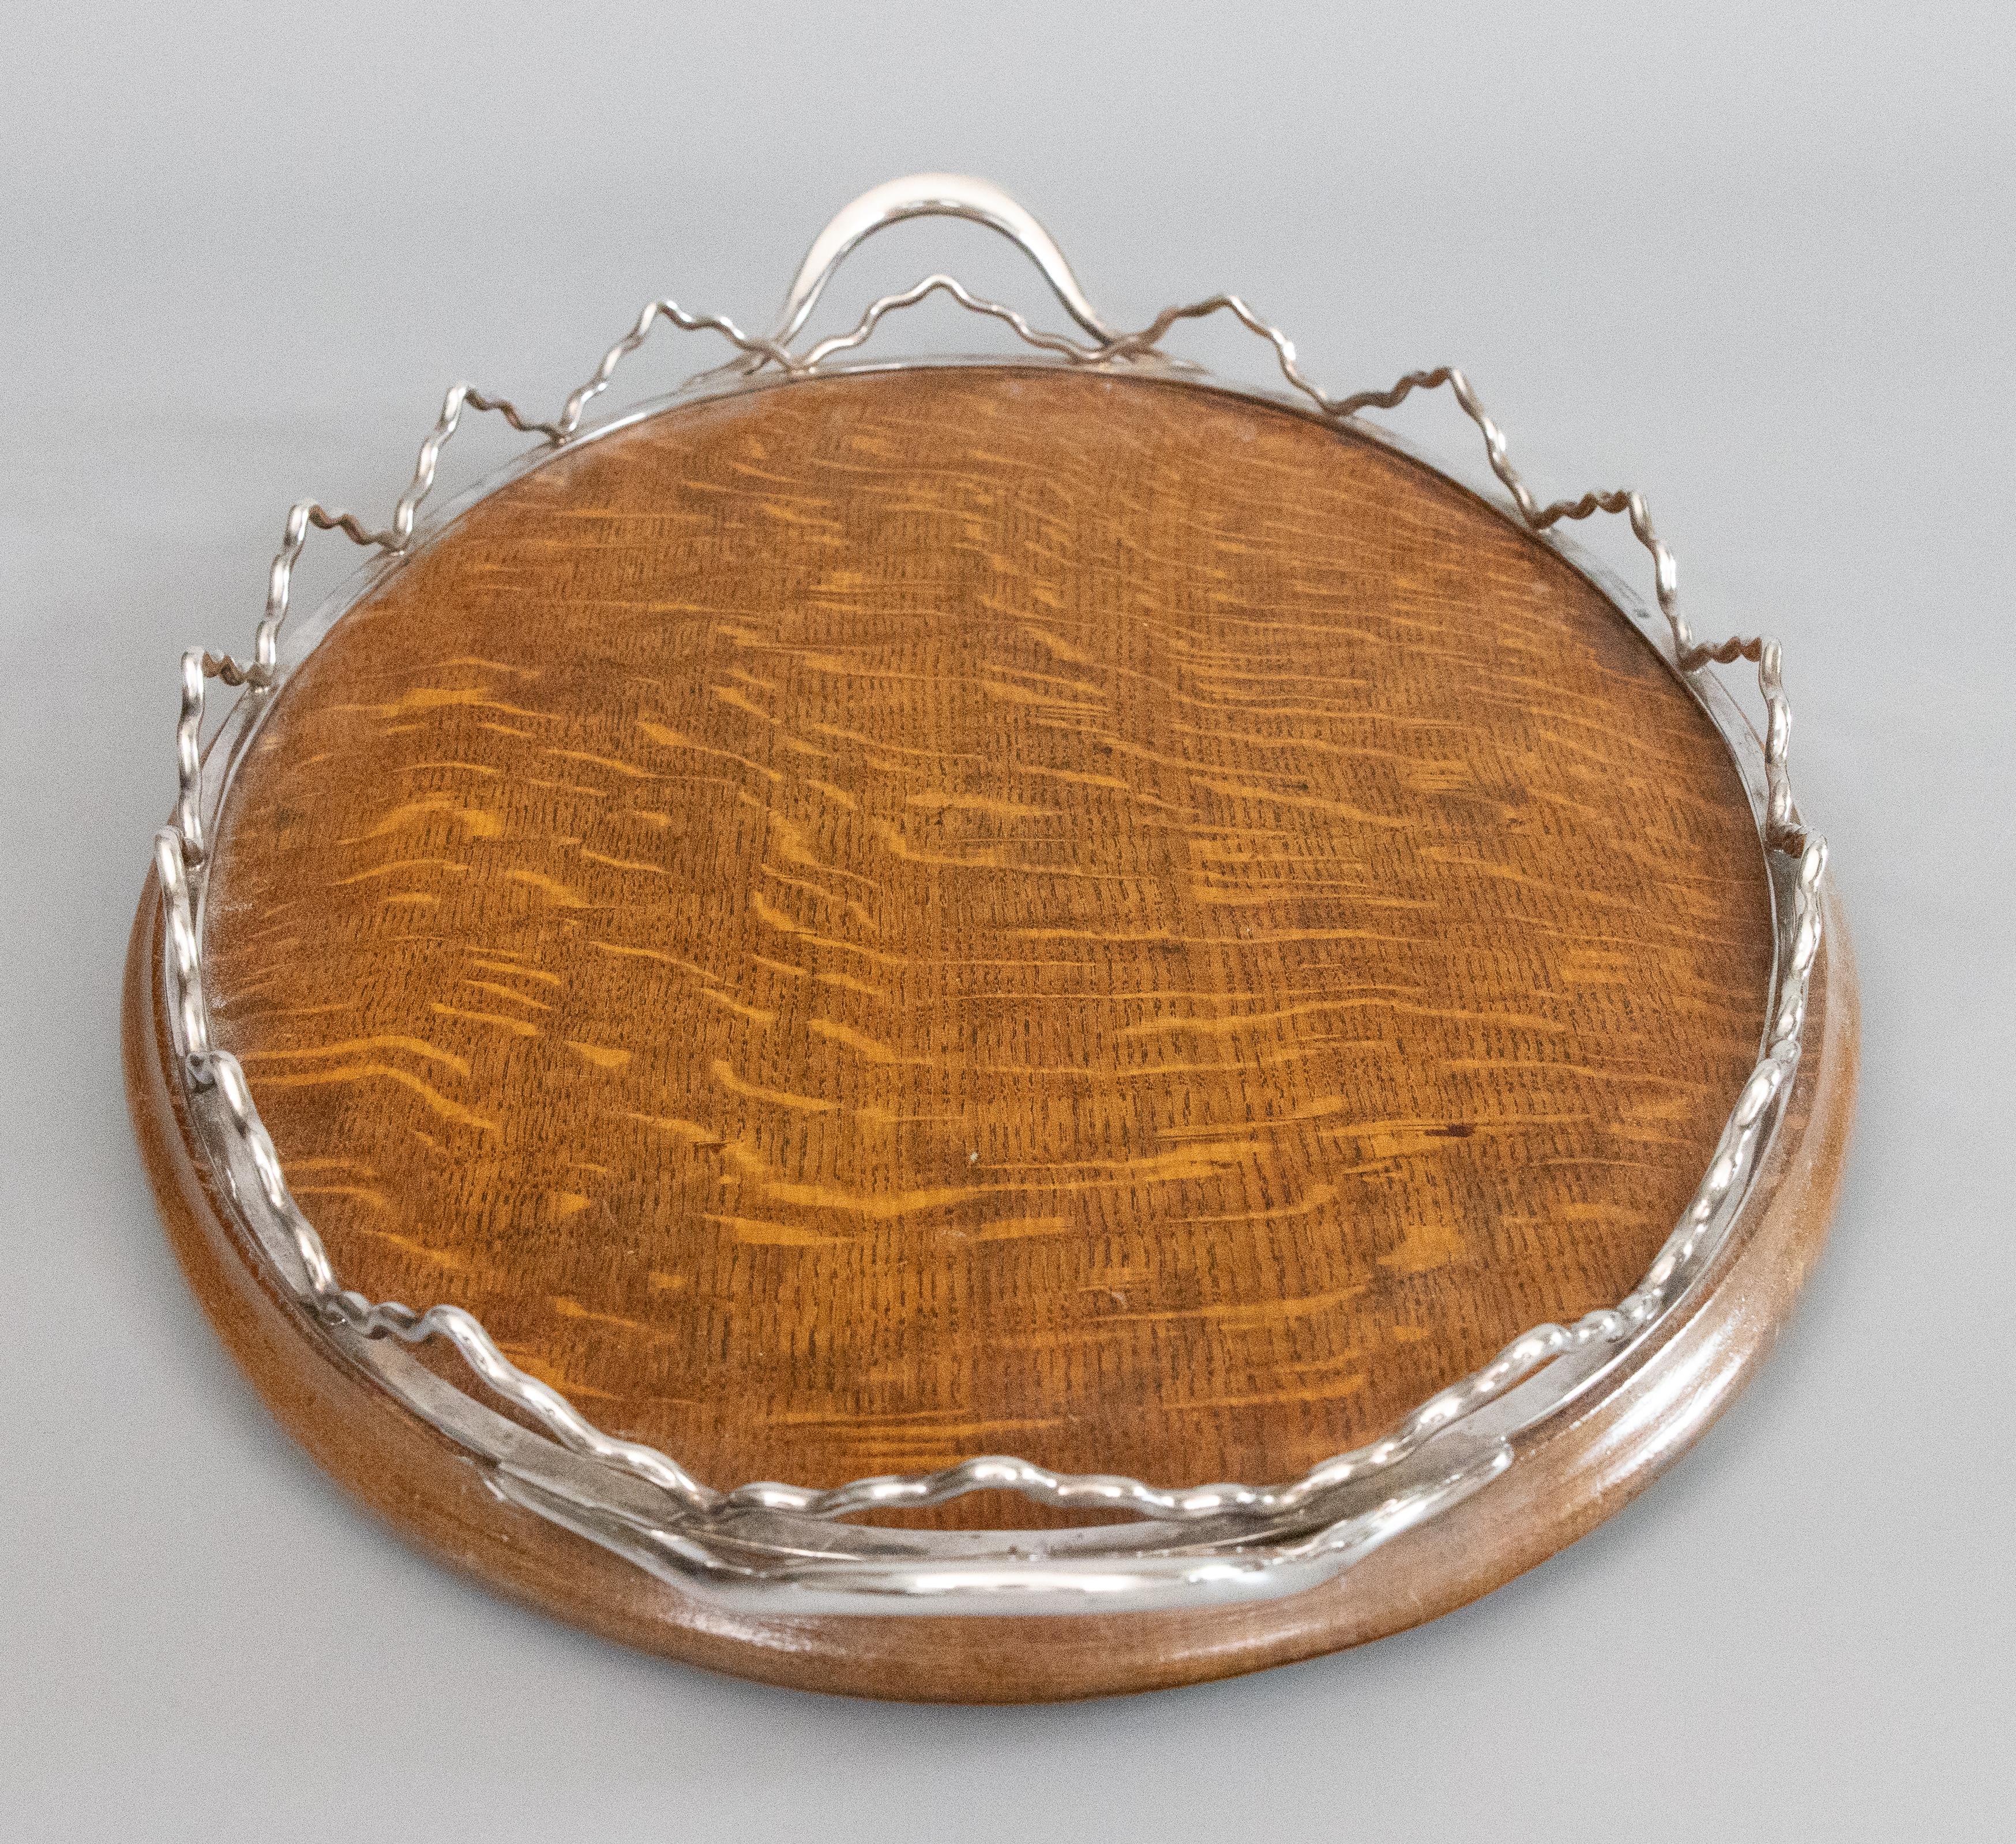 A fine antique English tiger oak oval serving tray with a rare wavy silver plate gallery on four bun feet, circa 1900. Hallmarked on handle. The original surface and patina add character to this stunning tray, which would be perfect for serving or